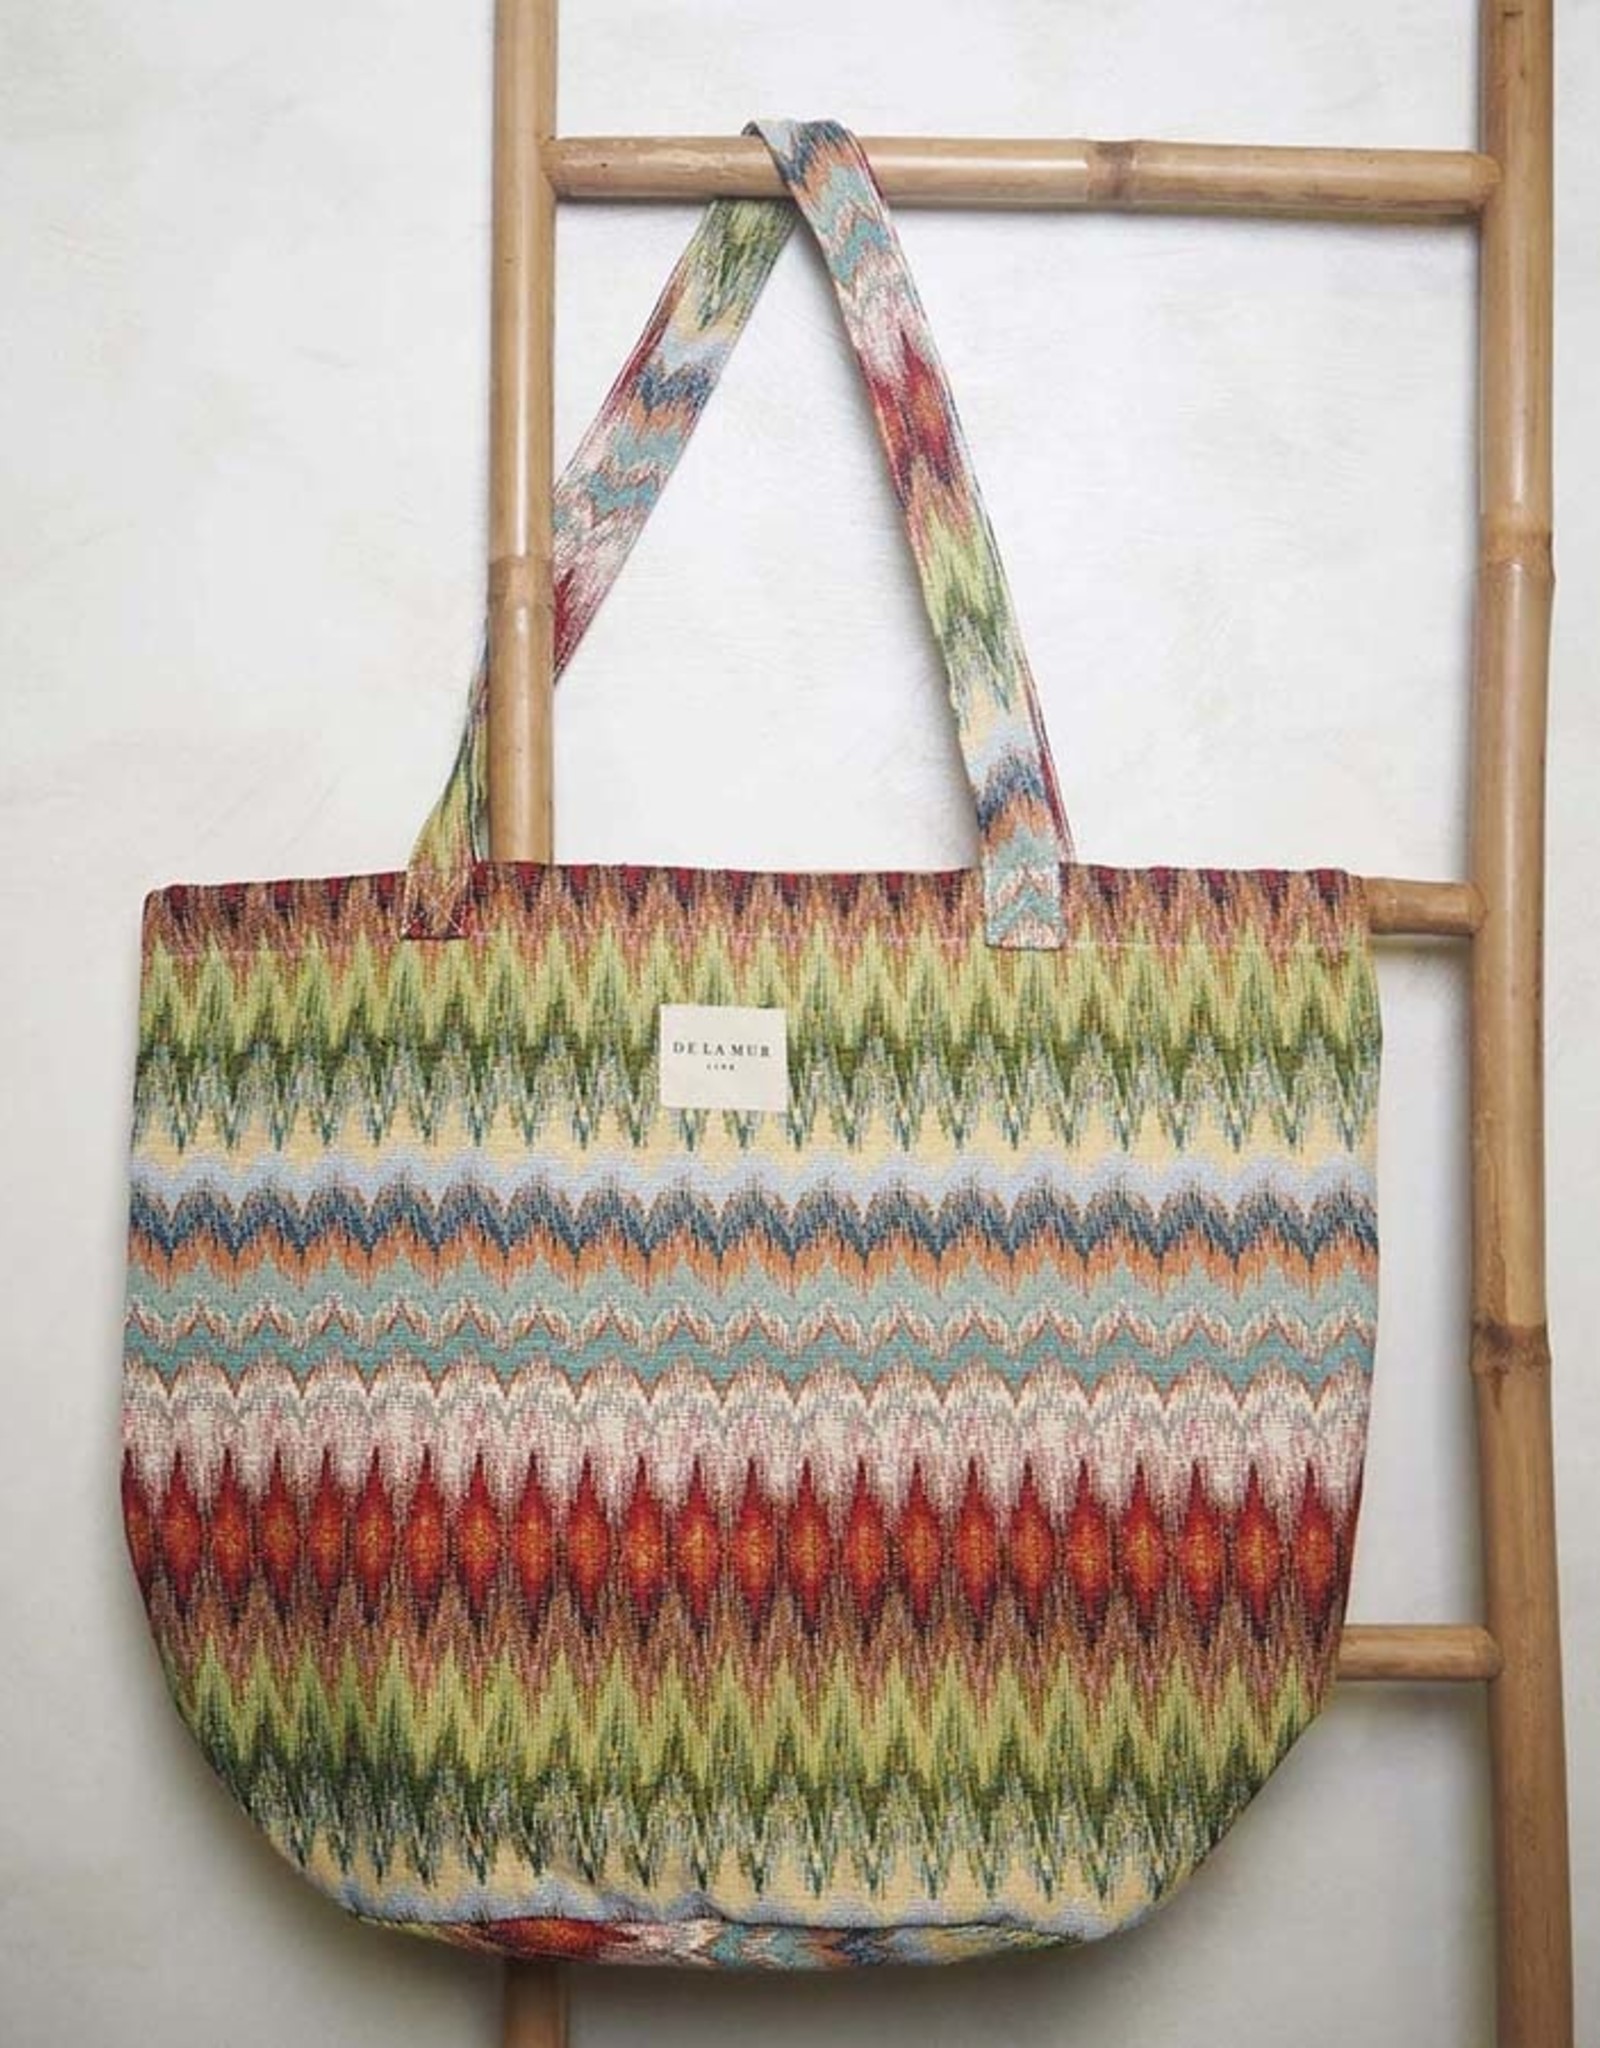 James Large Tote